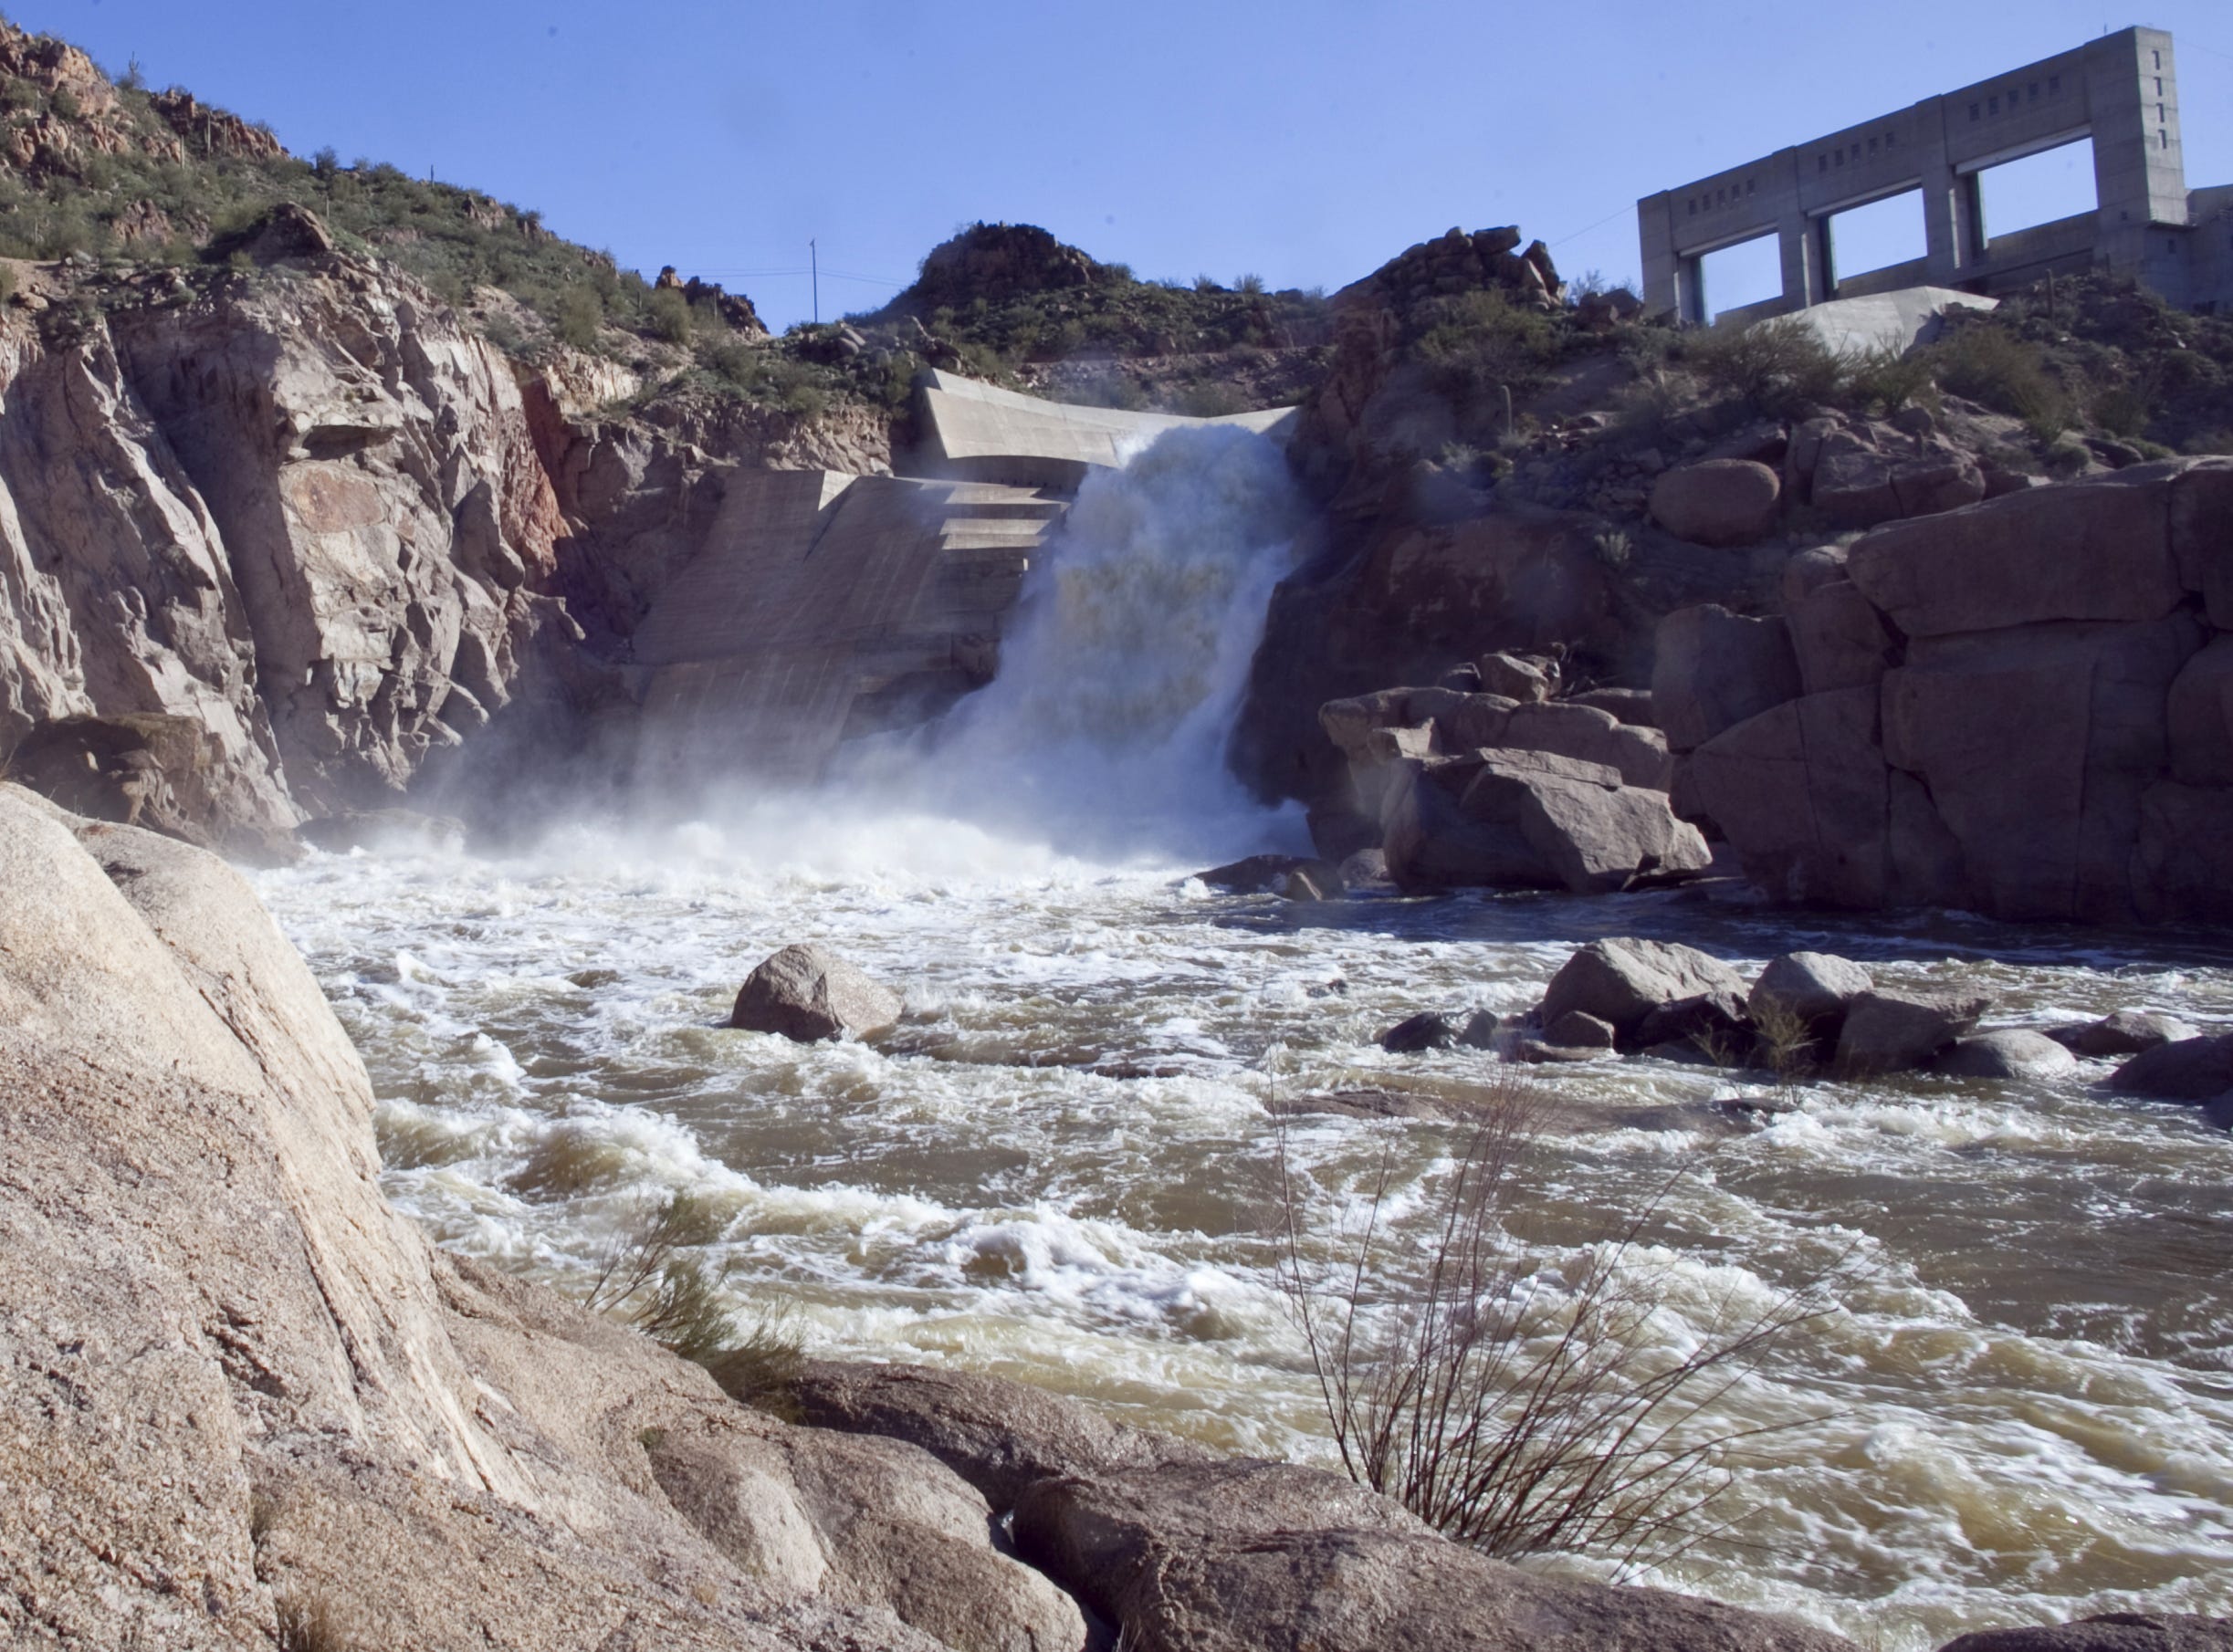 Water flows into the Verde River below Bartlett Dam in this photo from 2010. Salt River Project is studying a plan to raise the height of the dam to increase water storage.